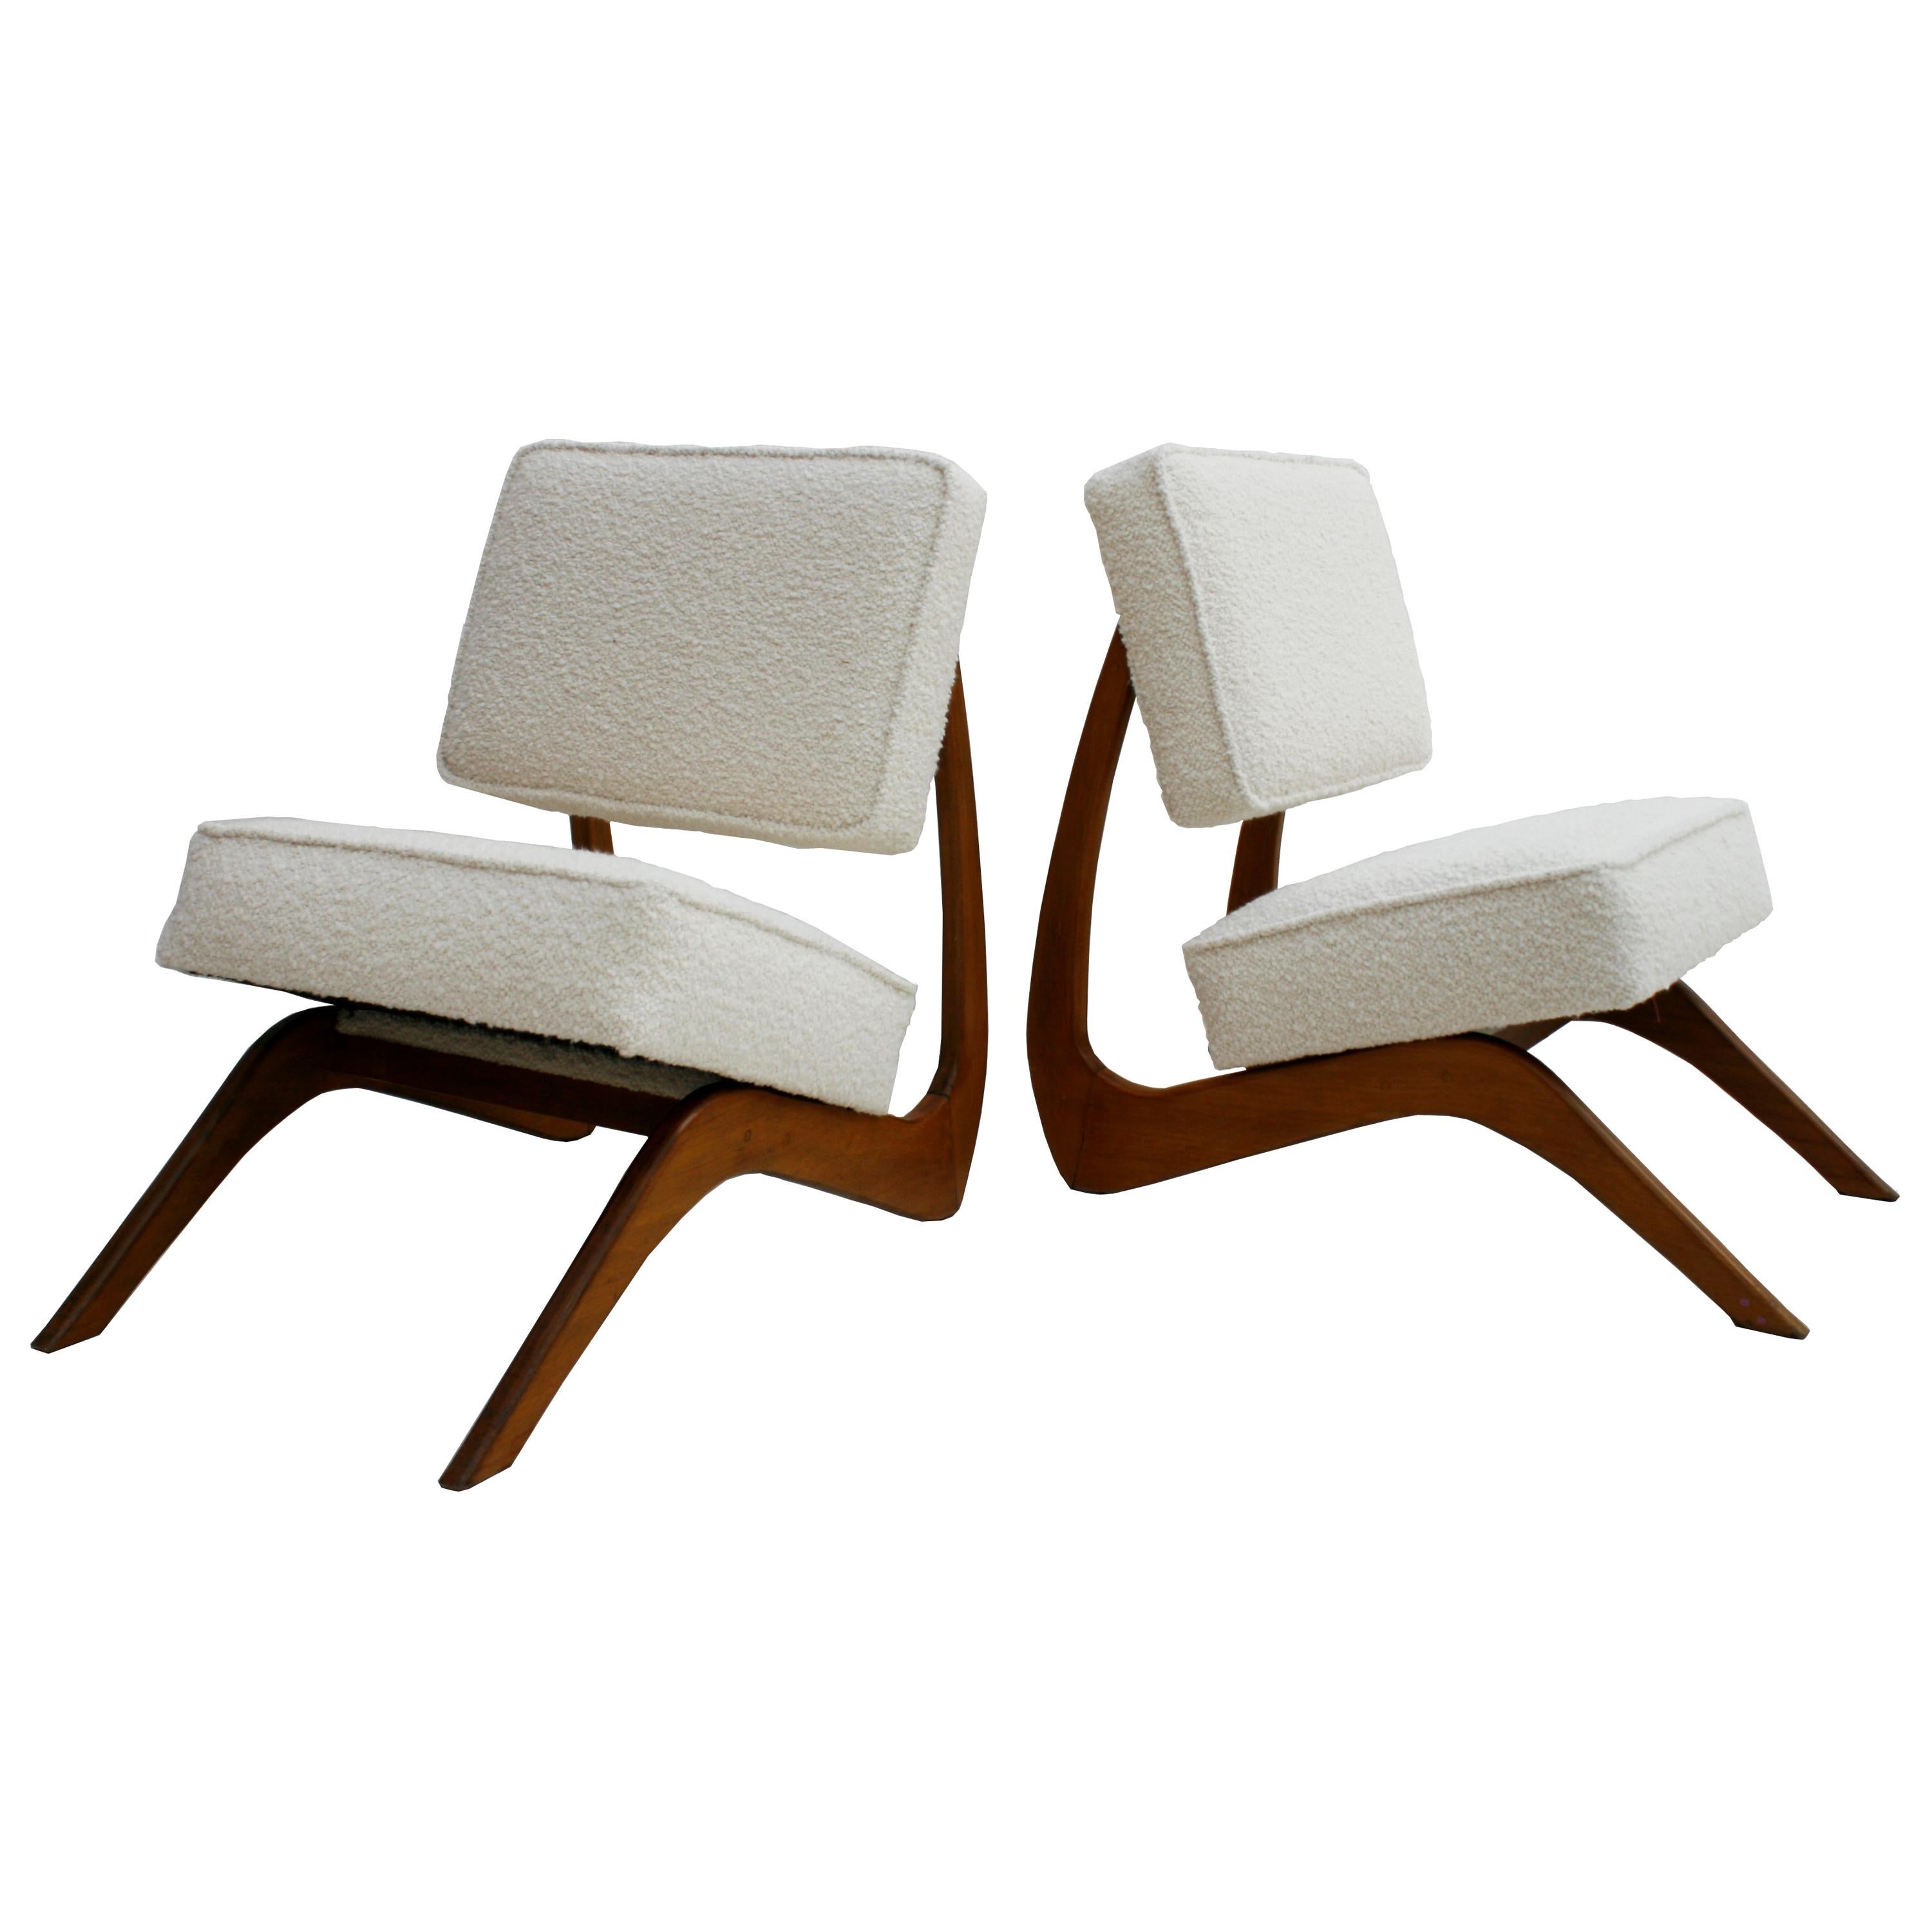 Adrian Pearsall Mid-Century Modern Walnut Pair of American Lounge Chairs